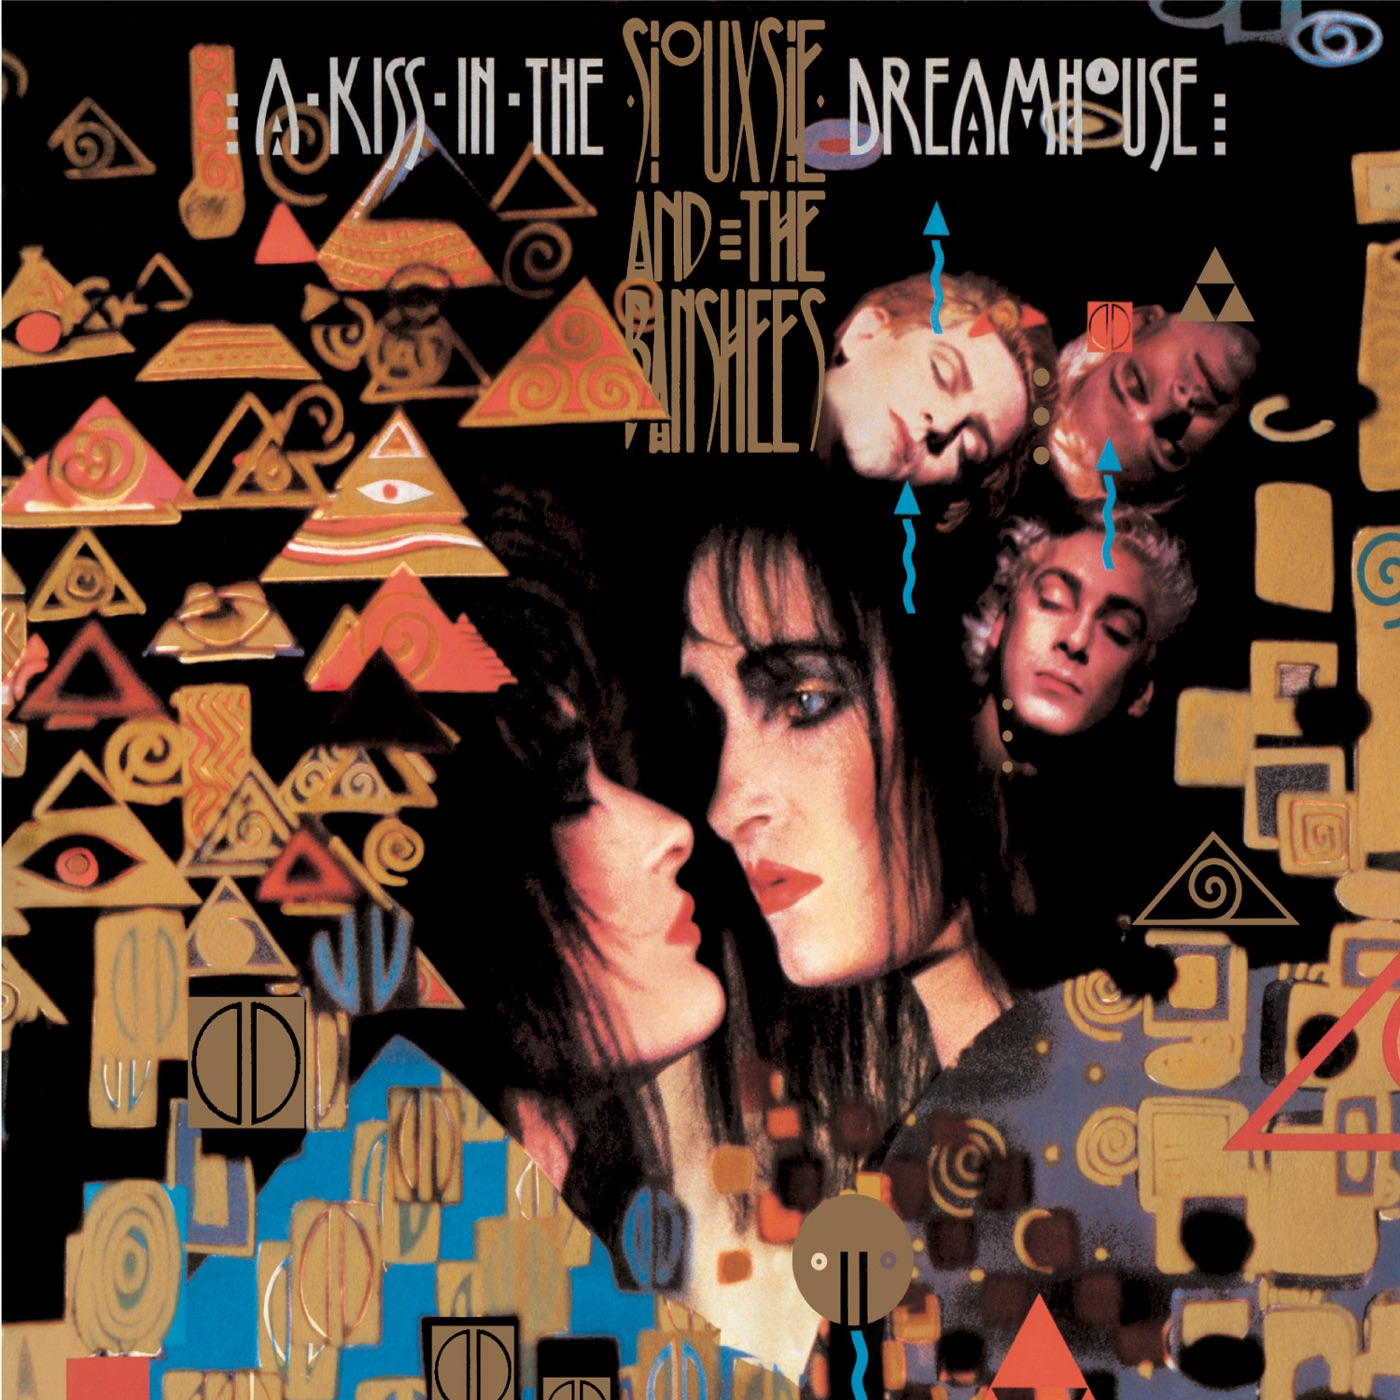 A Kiss In The Dreamhouse by Siouxsie and the Banshees